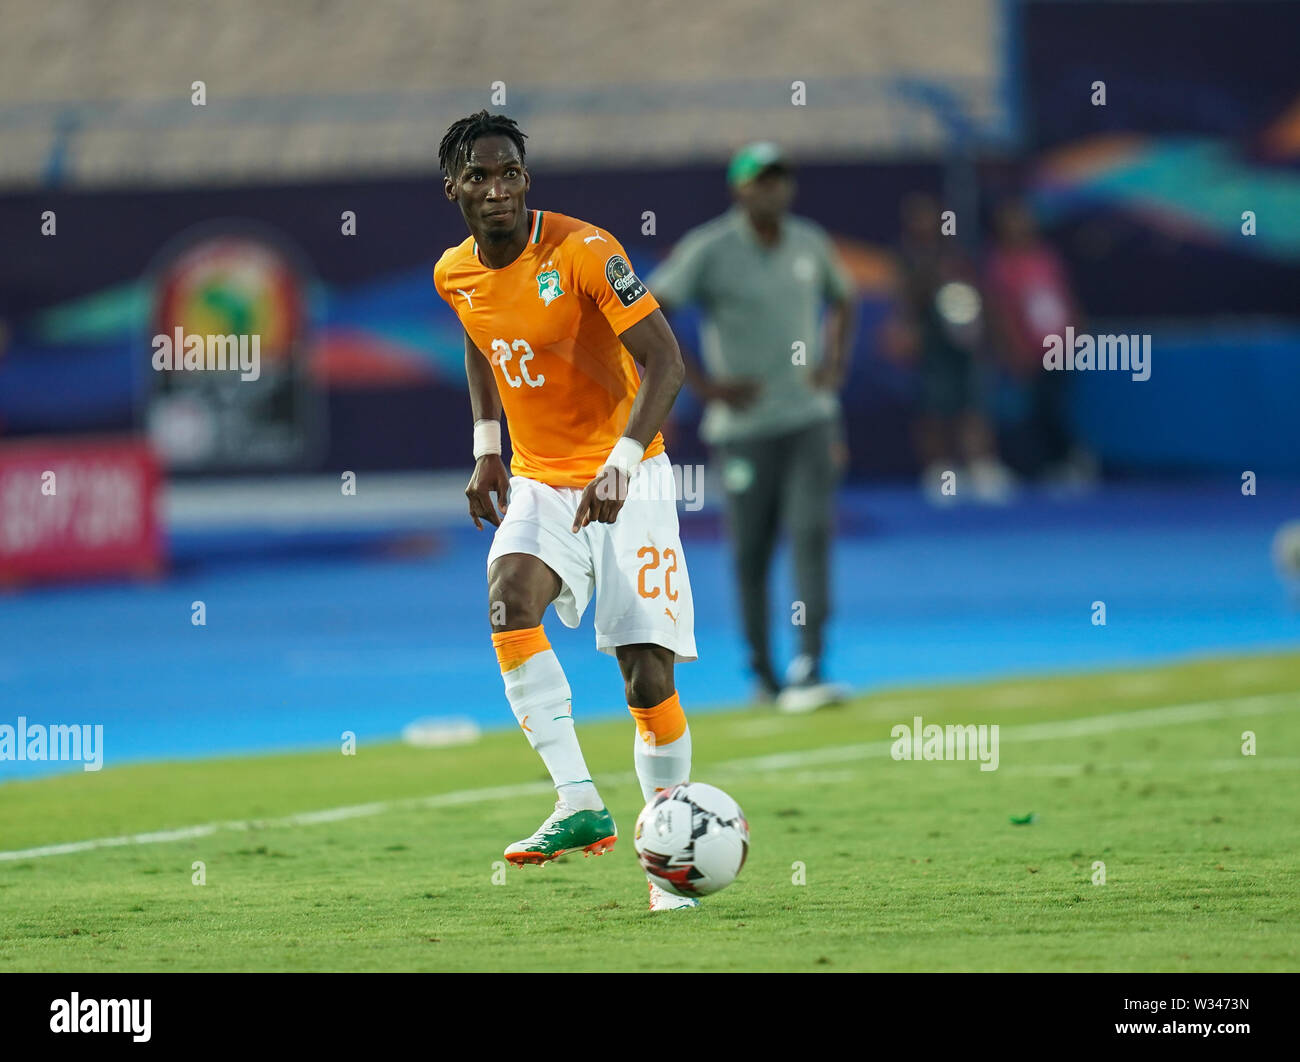 Suez, Egypt. 11th July, 2019. Ivory coast, Egypt - FRANCE OUT July 11, 2019: Bagayoko Mamadou of Cote D'ivoire during the 2019 African Cup of Nations match between Ivory coast and Algeria at the Suez Stadium in Suez, Egypt. Ulrik Pedersen/CSM/Alamy Live News Stock Photo